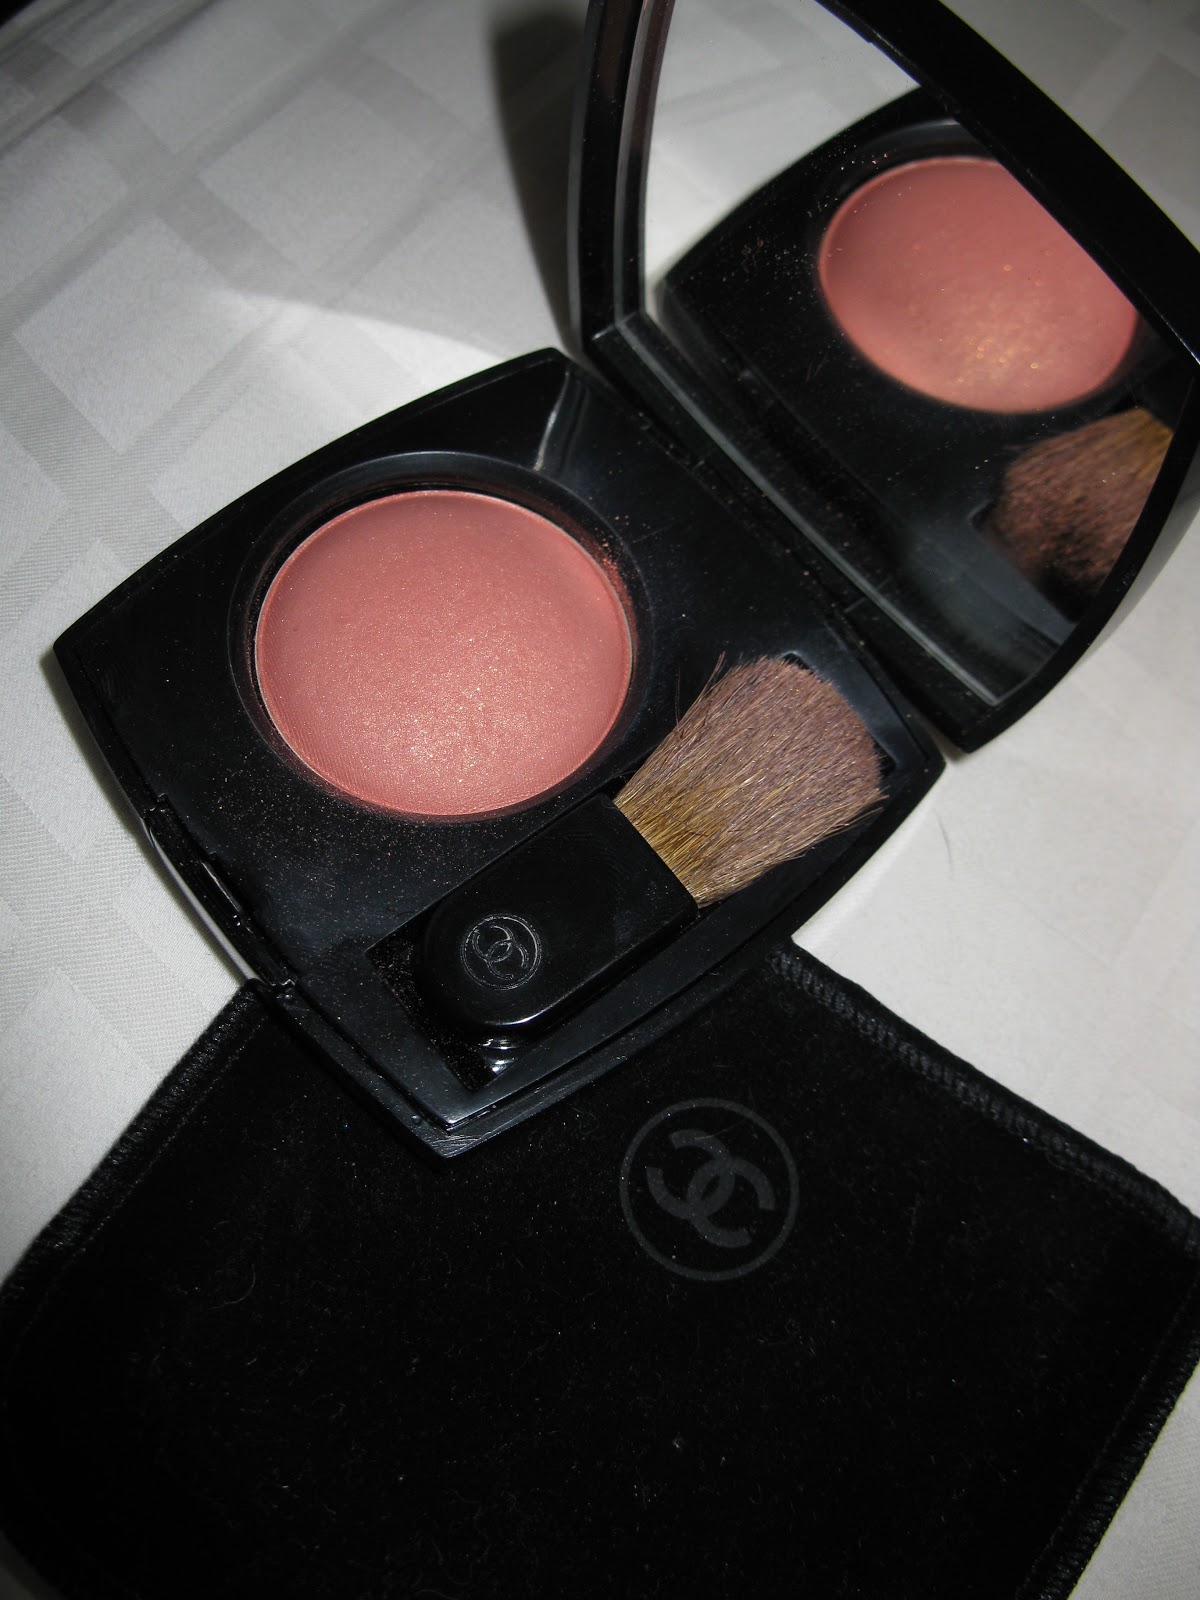 Beauty and the Newb: Will You Fall In Love With No.55? CHANEL 55 In Love  Blush, That Is